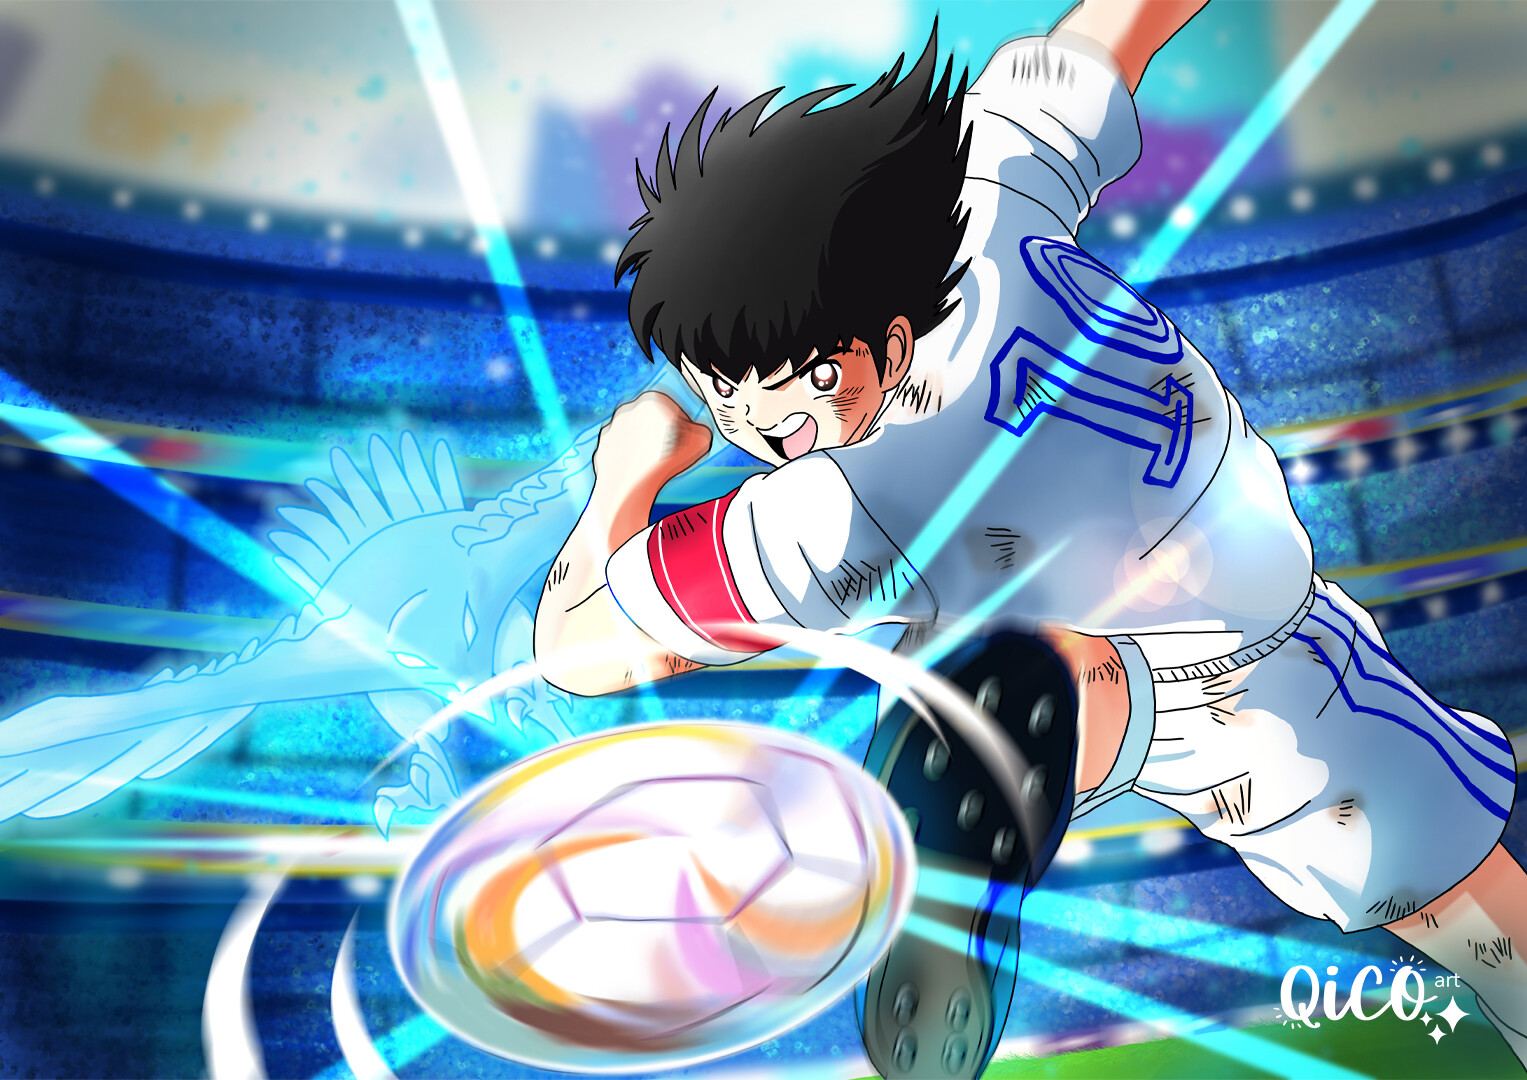 Captain Tsubasa Anime Comes To An End With Its 52nd Episode On Monday   Manga Thrill